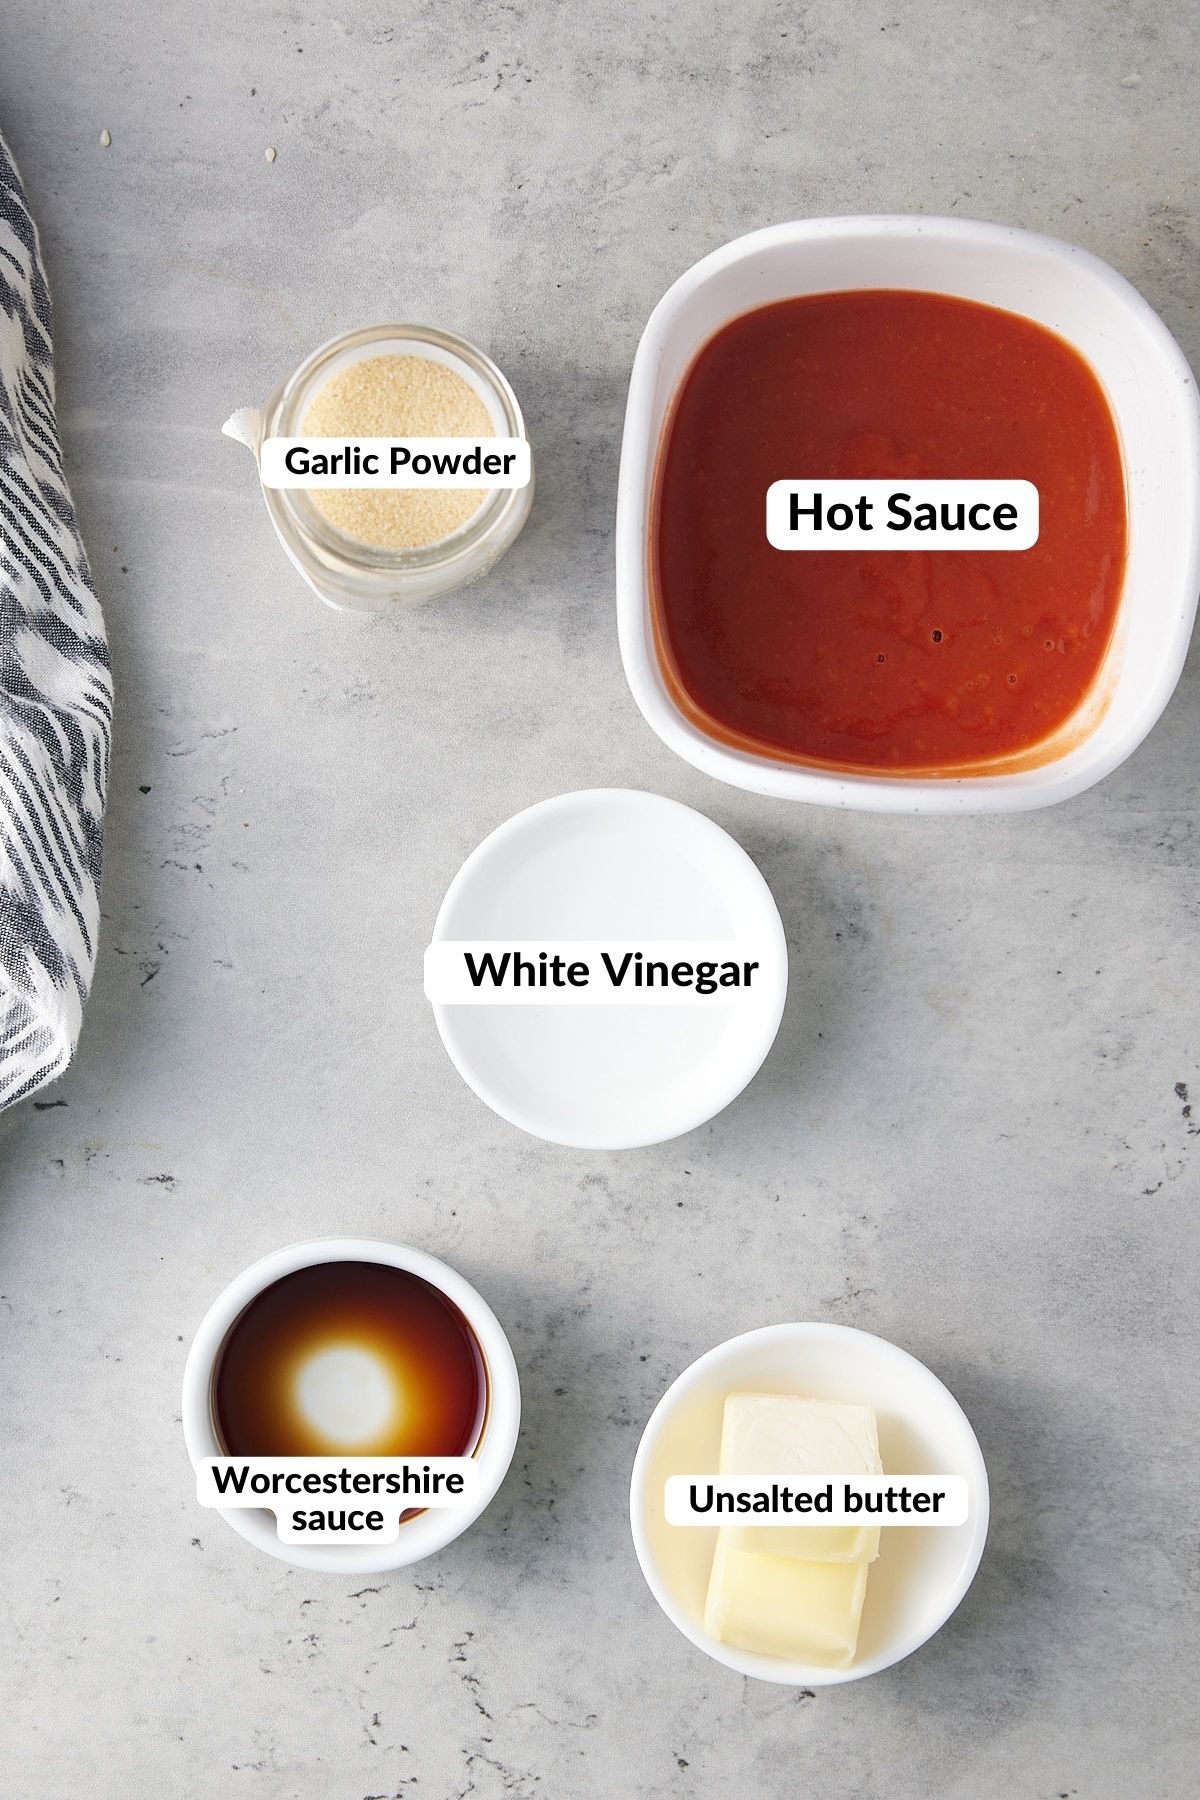 buffalo sauce ingredients on table with text of each ingredient name